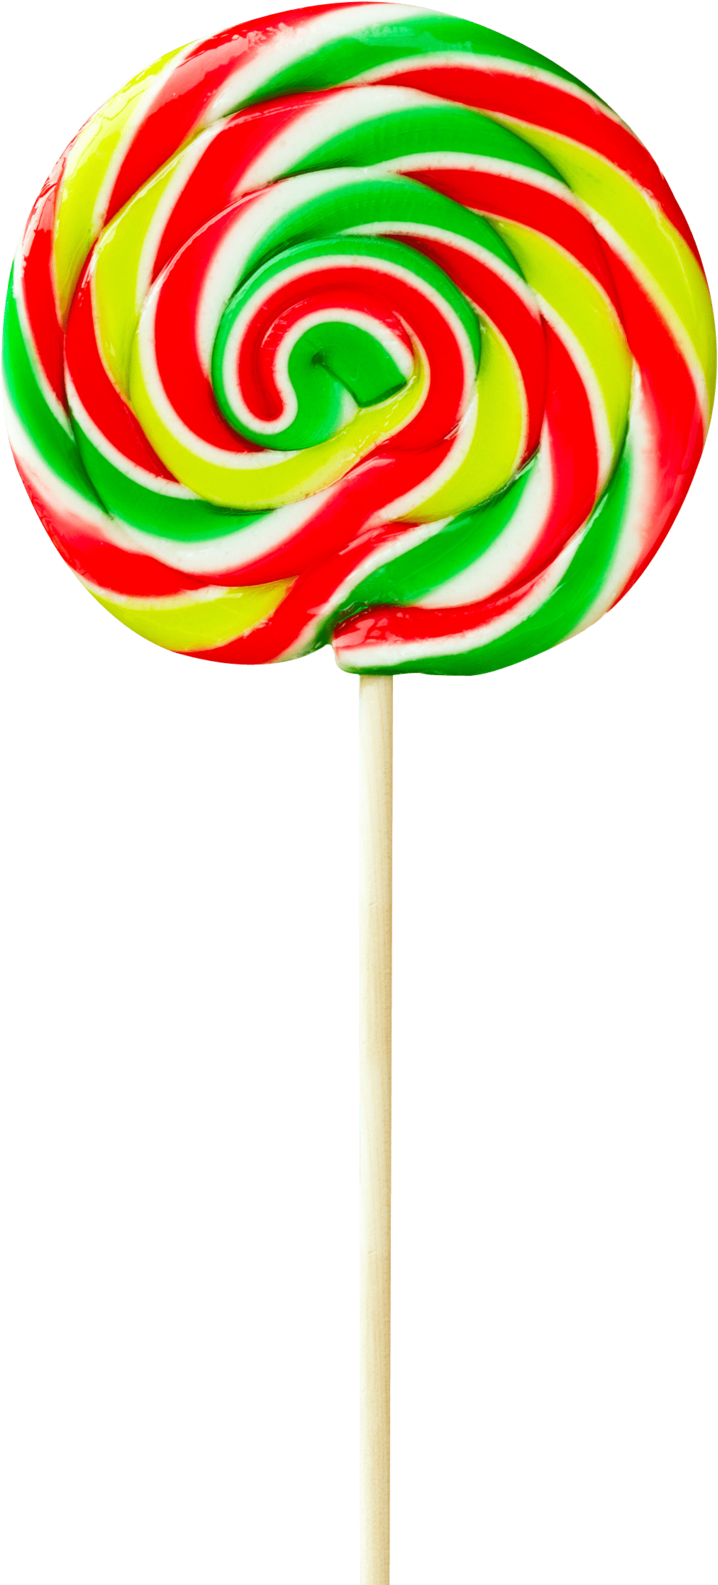 Lollipop Fresh Sweetened Candy Miscellaneous PNG